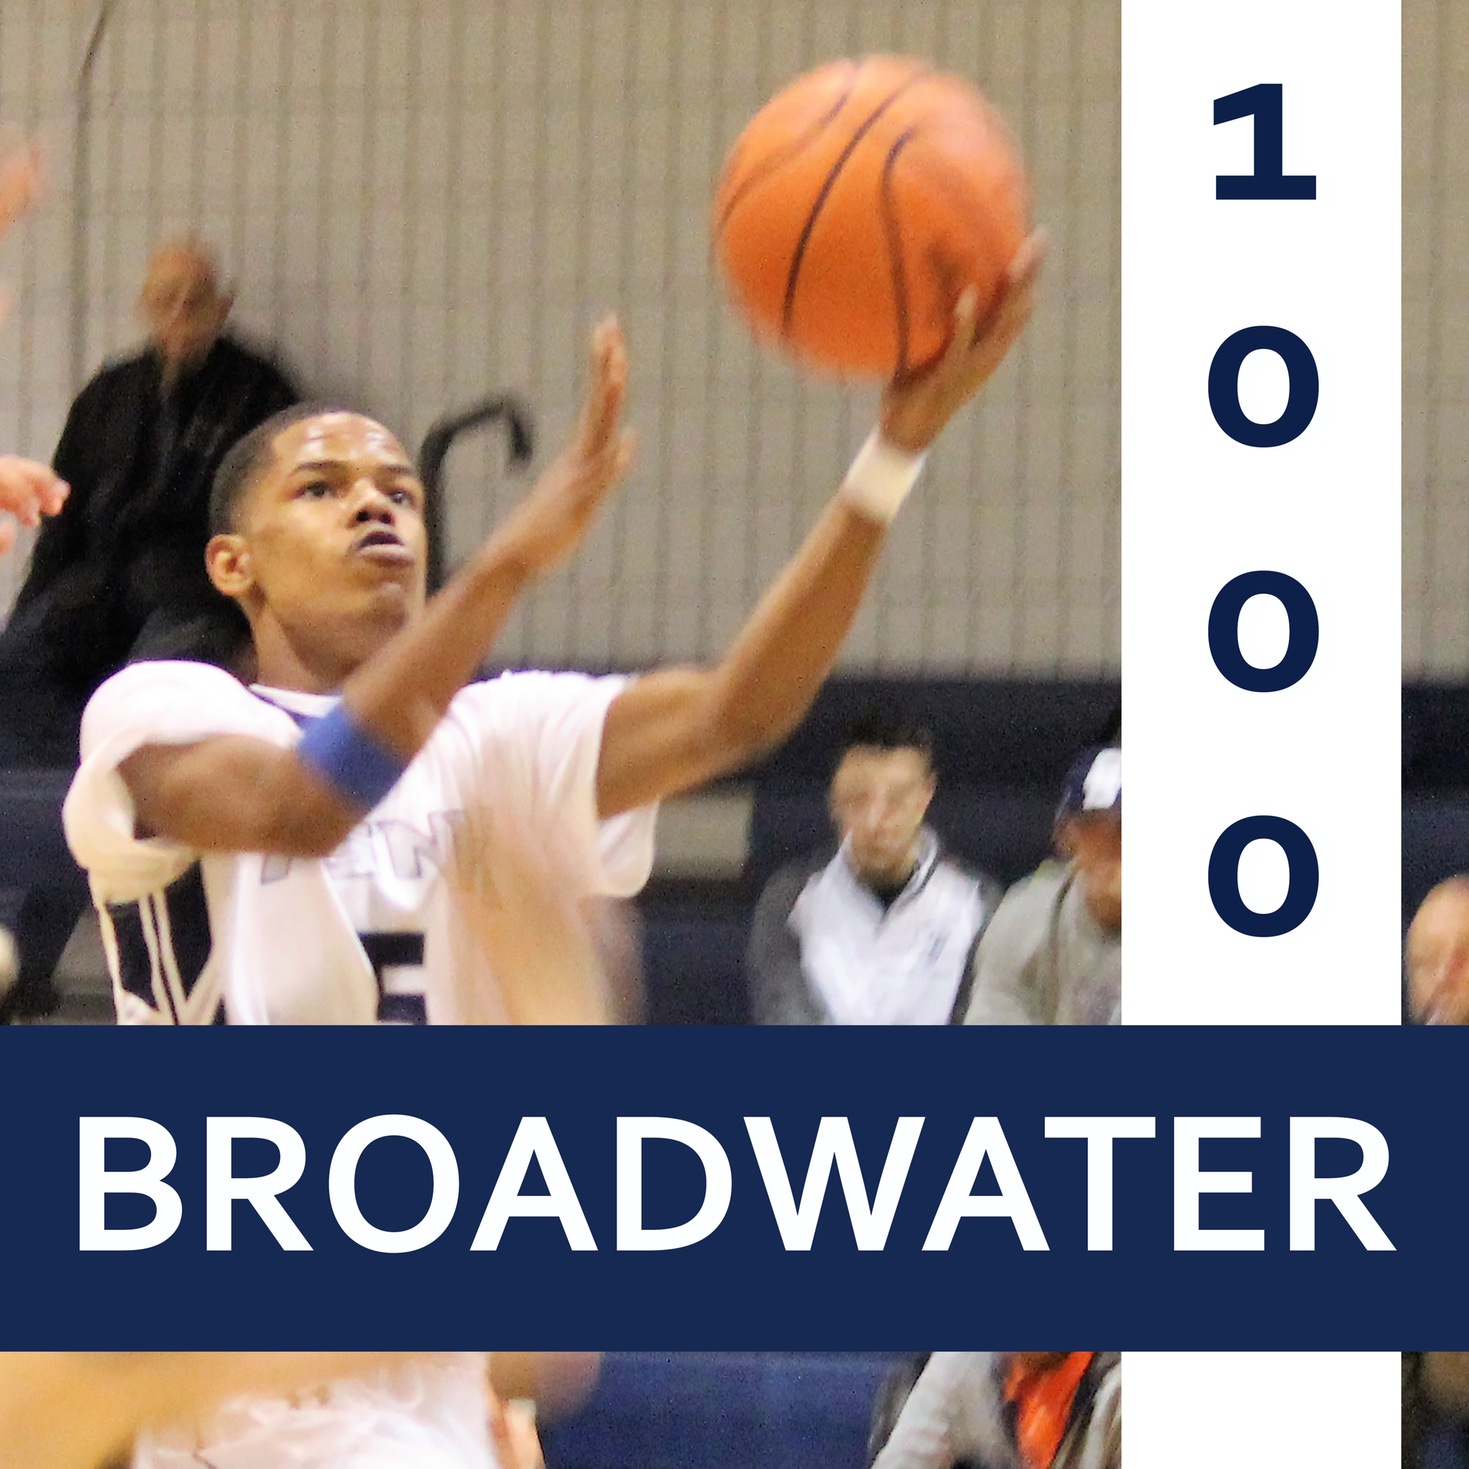 Dorian Broadwater Scores 1000th Career Point